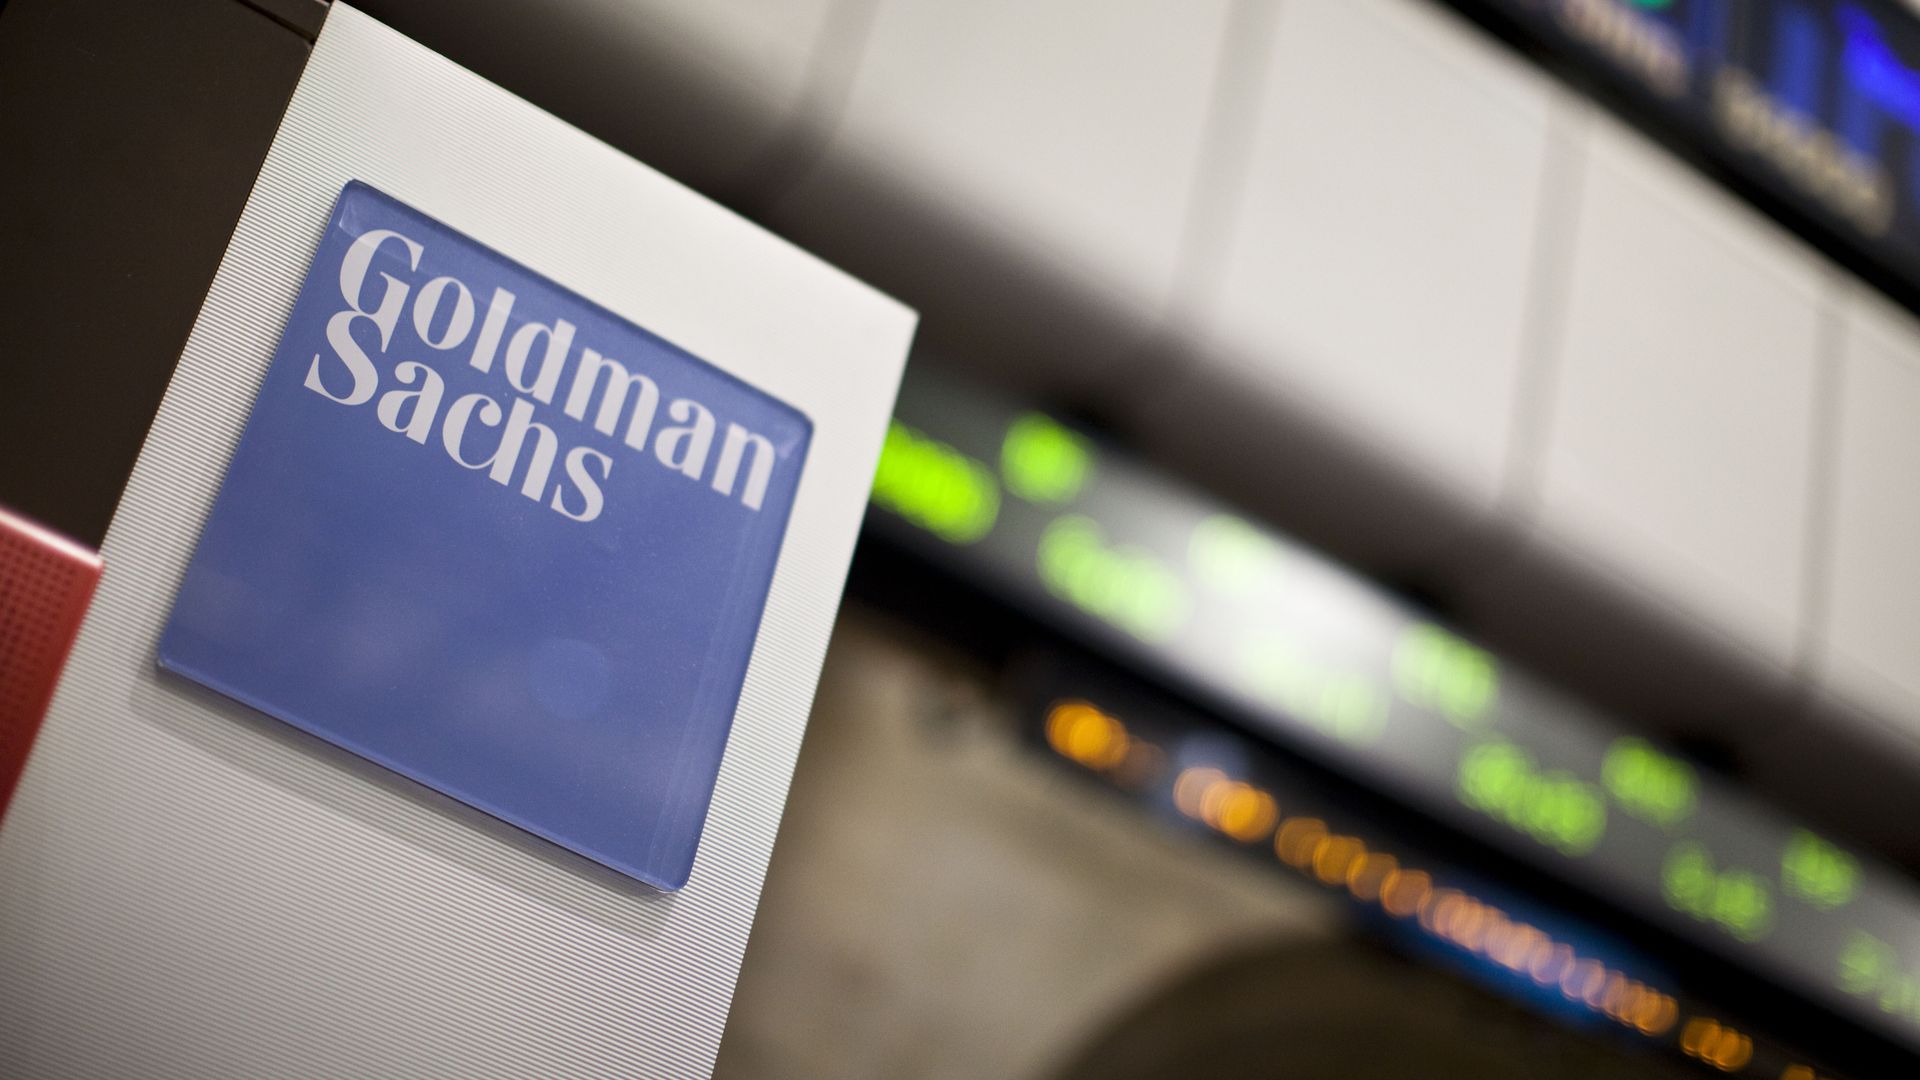 Goldman Sachs trading booth on the floor of the New York Stock Exchange in New York, on Thursday, January 6, 2011. (Photo by Ramin Talaie/Corbis via Getty Images)